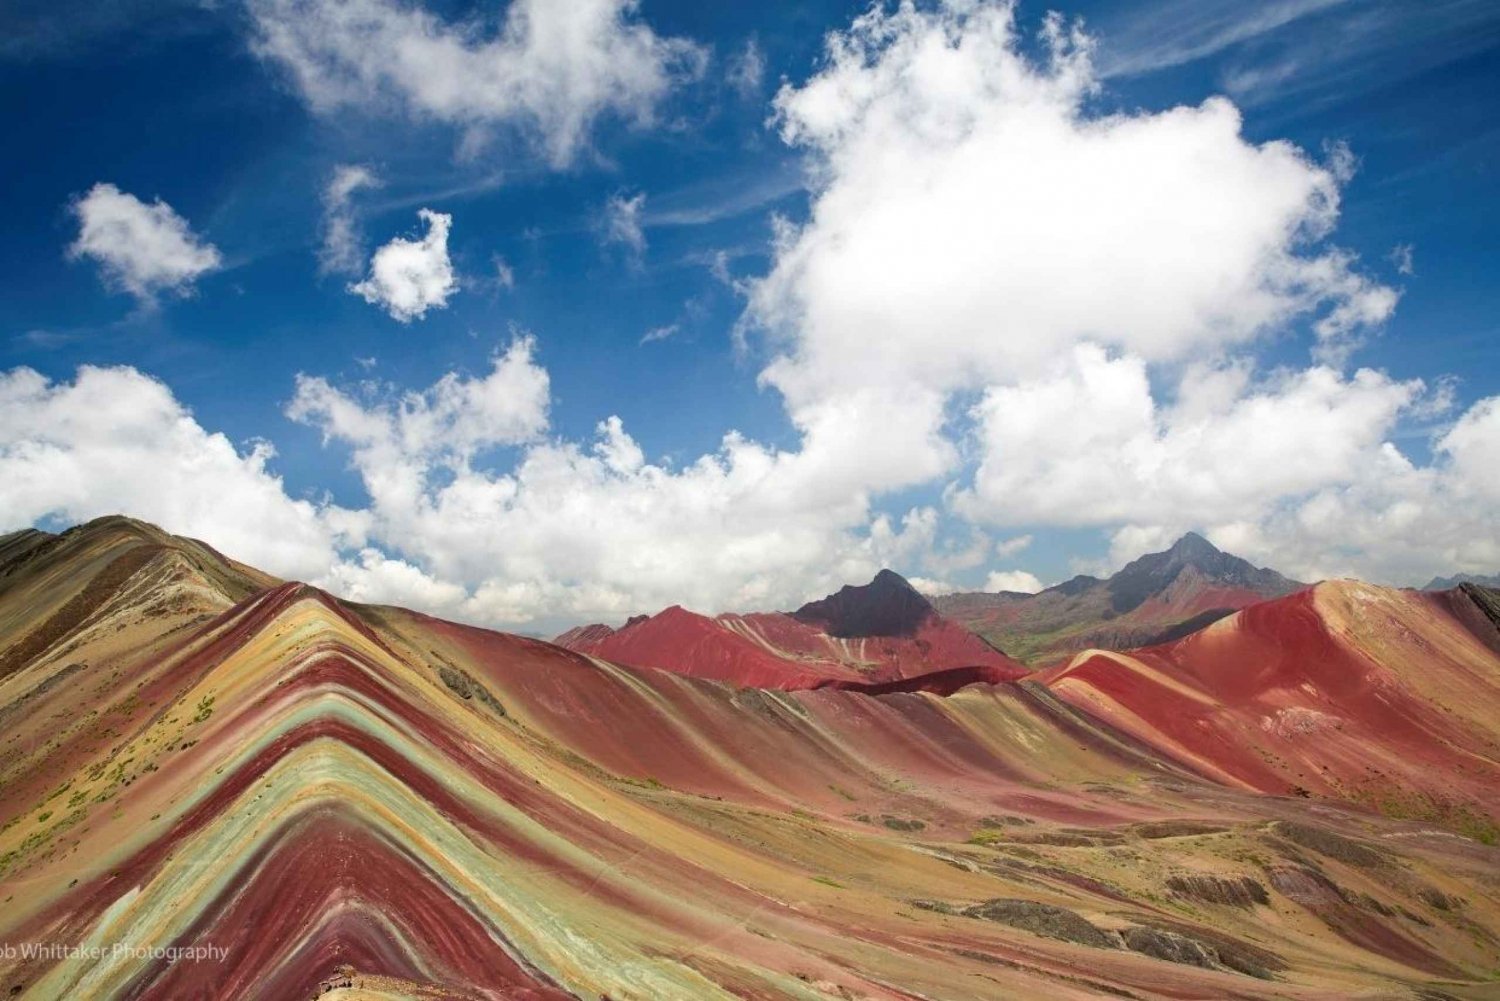 From Cusco: Quad Tour to Rainbow Mountain with meals